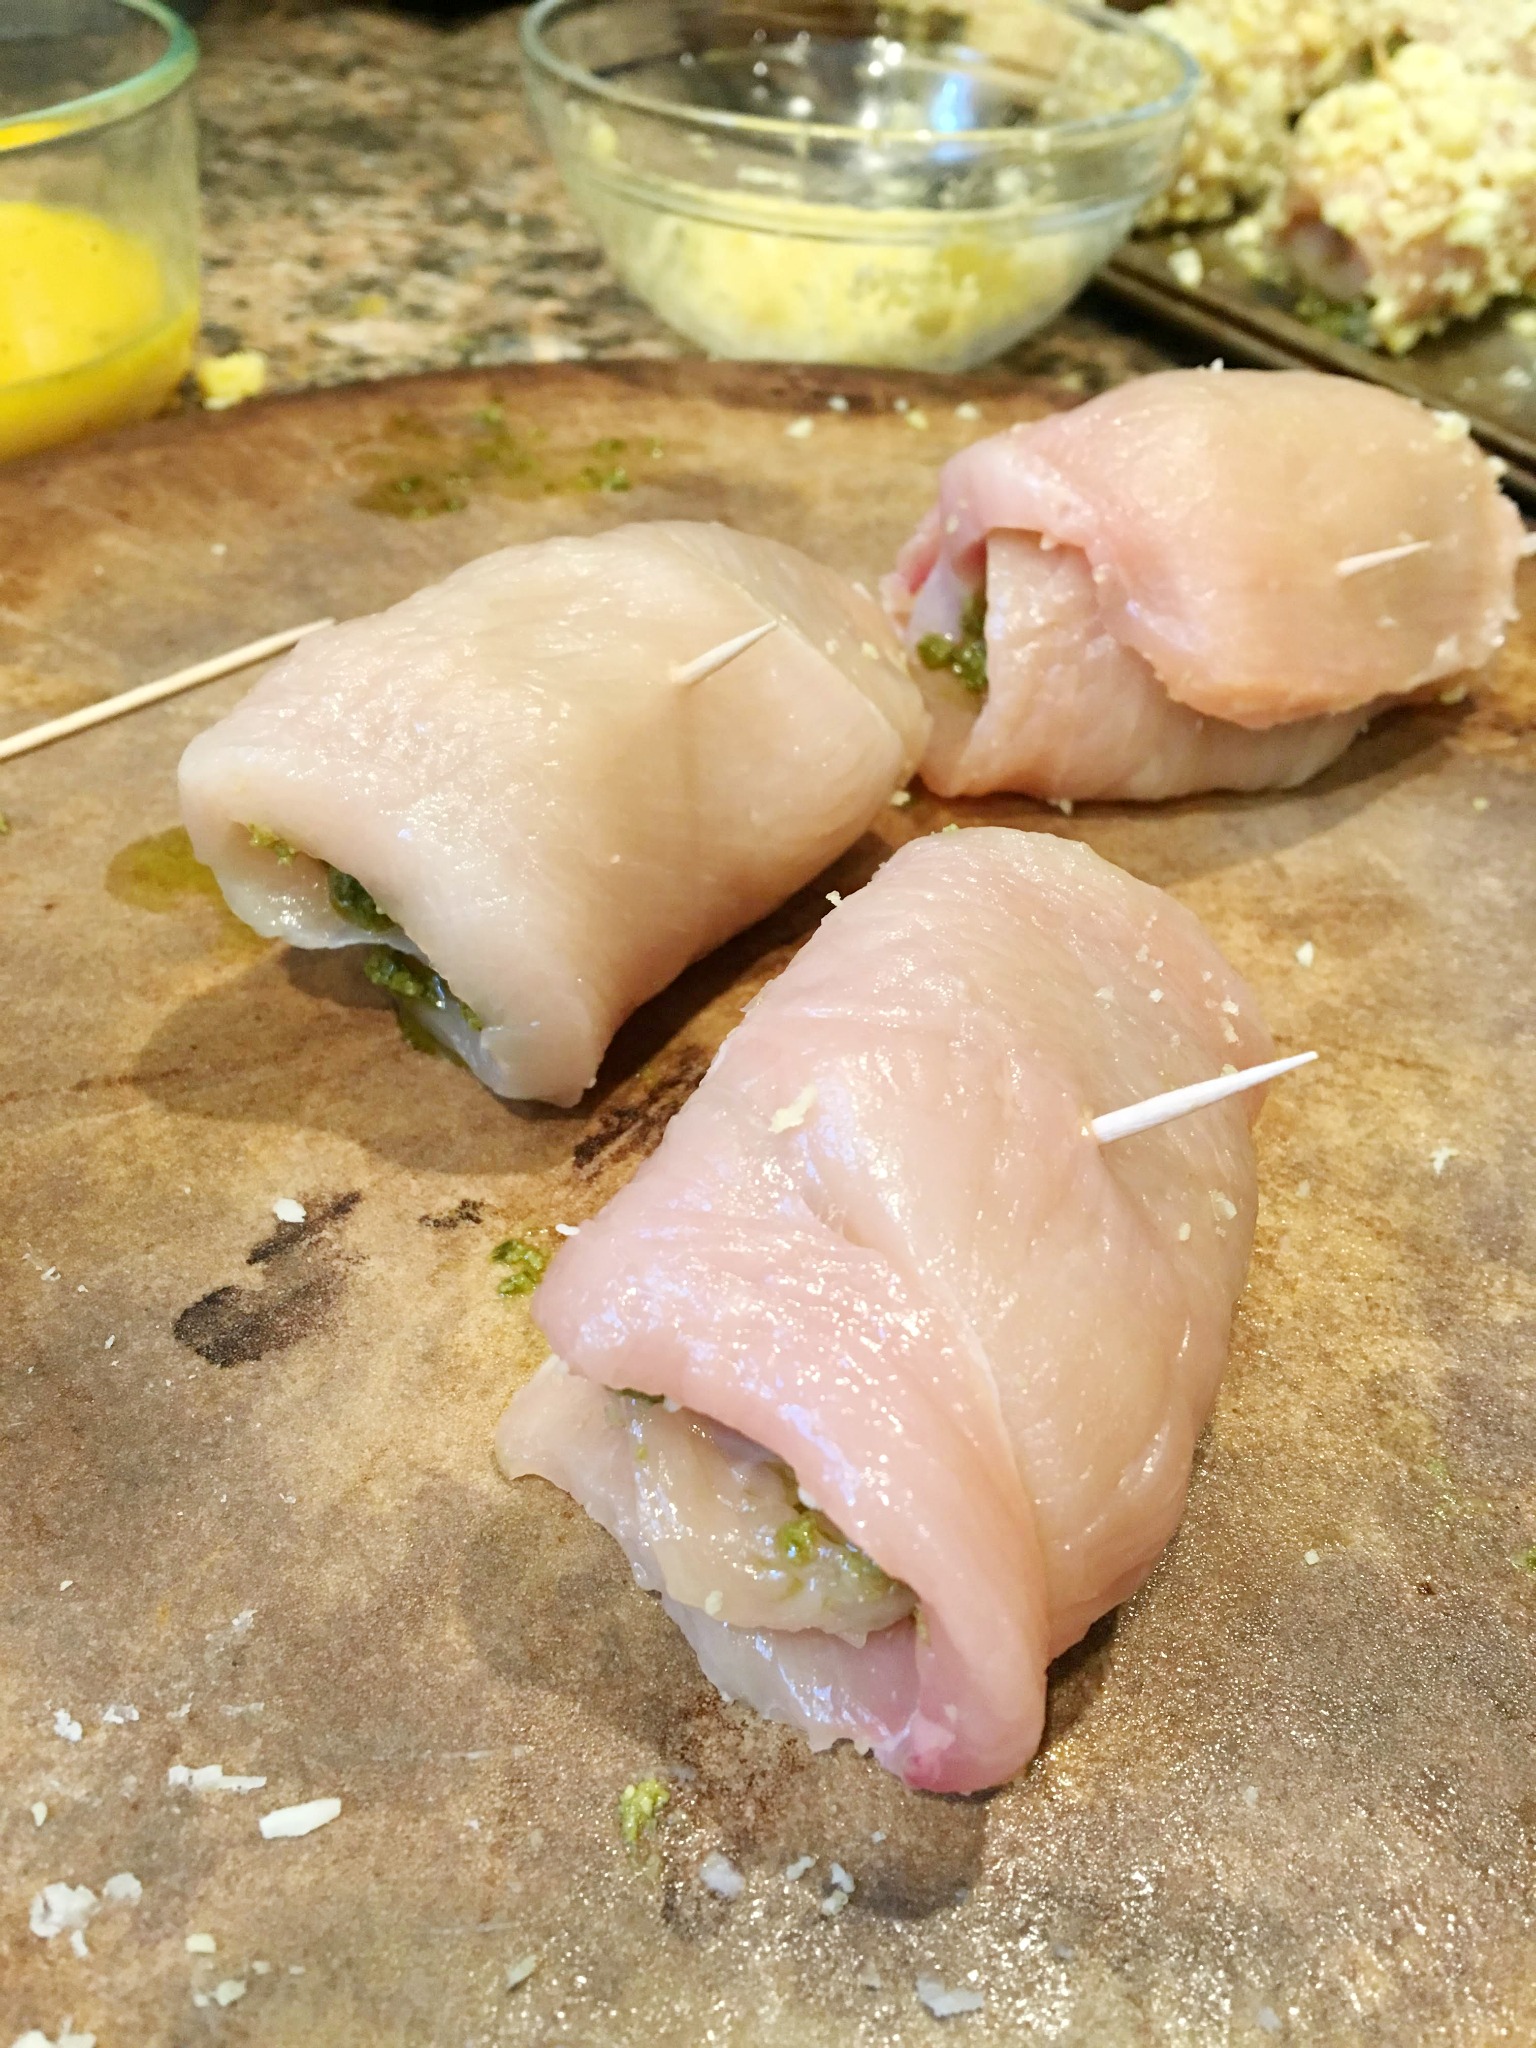 chicken roll-ups before cooking secured with a toothpick